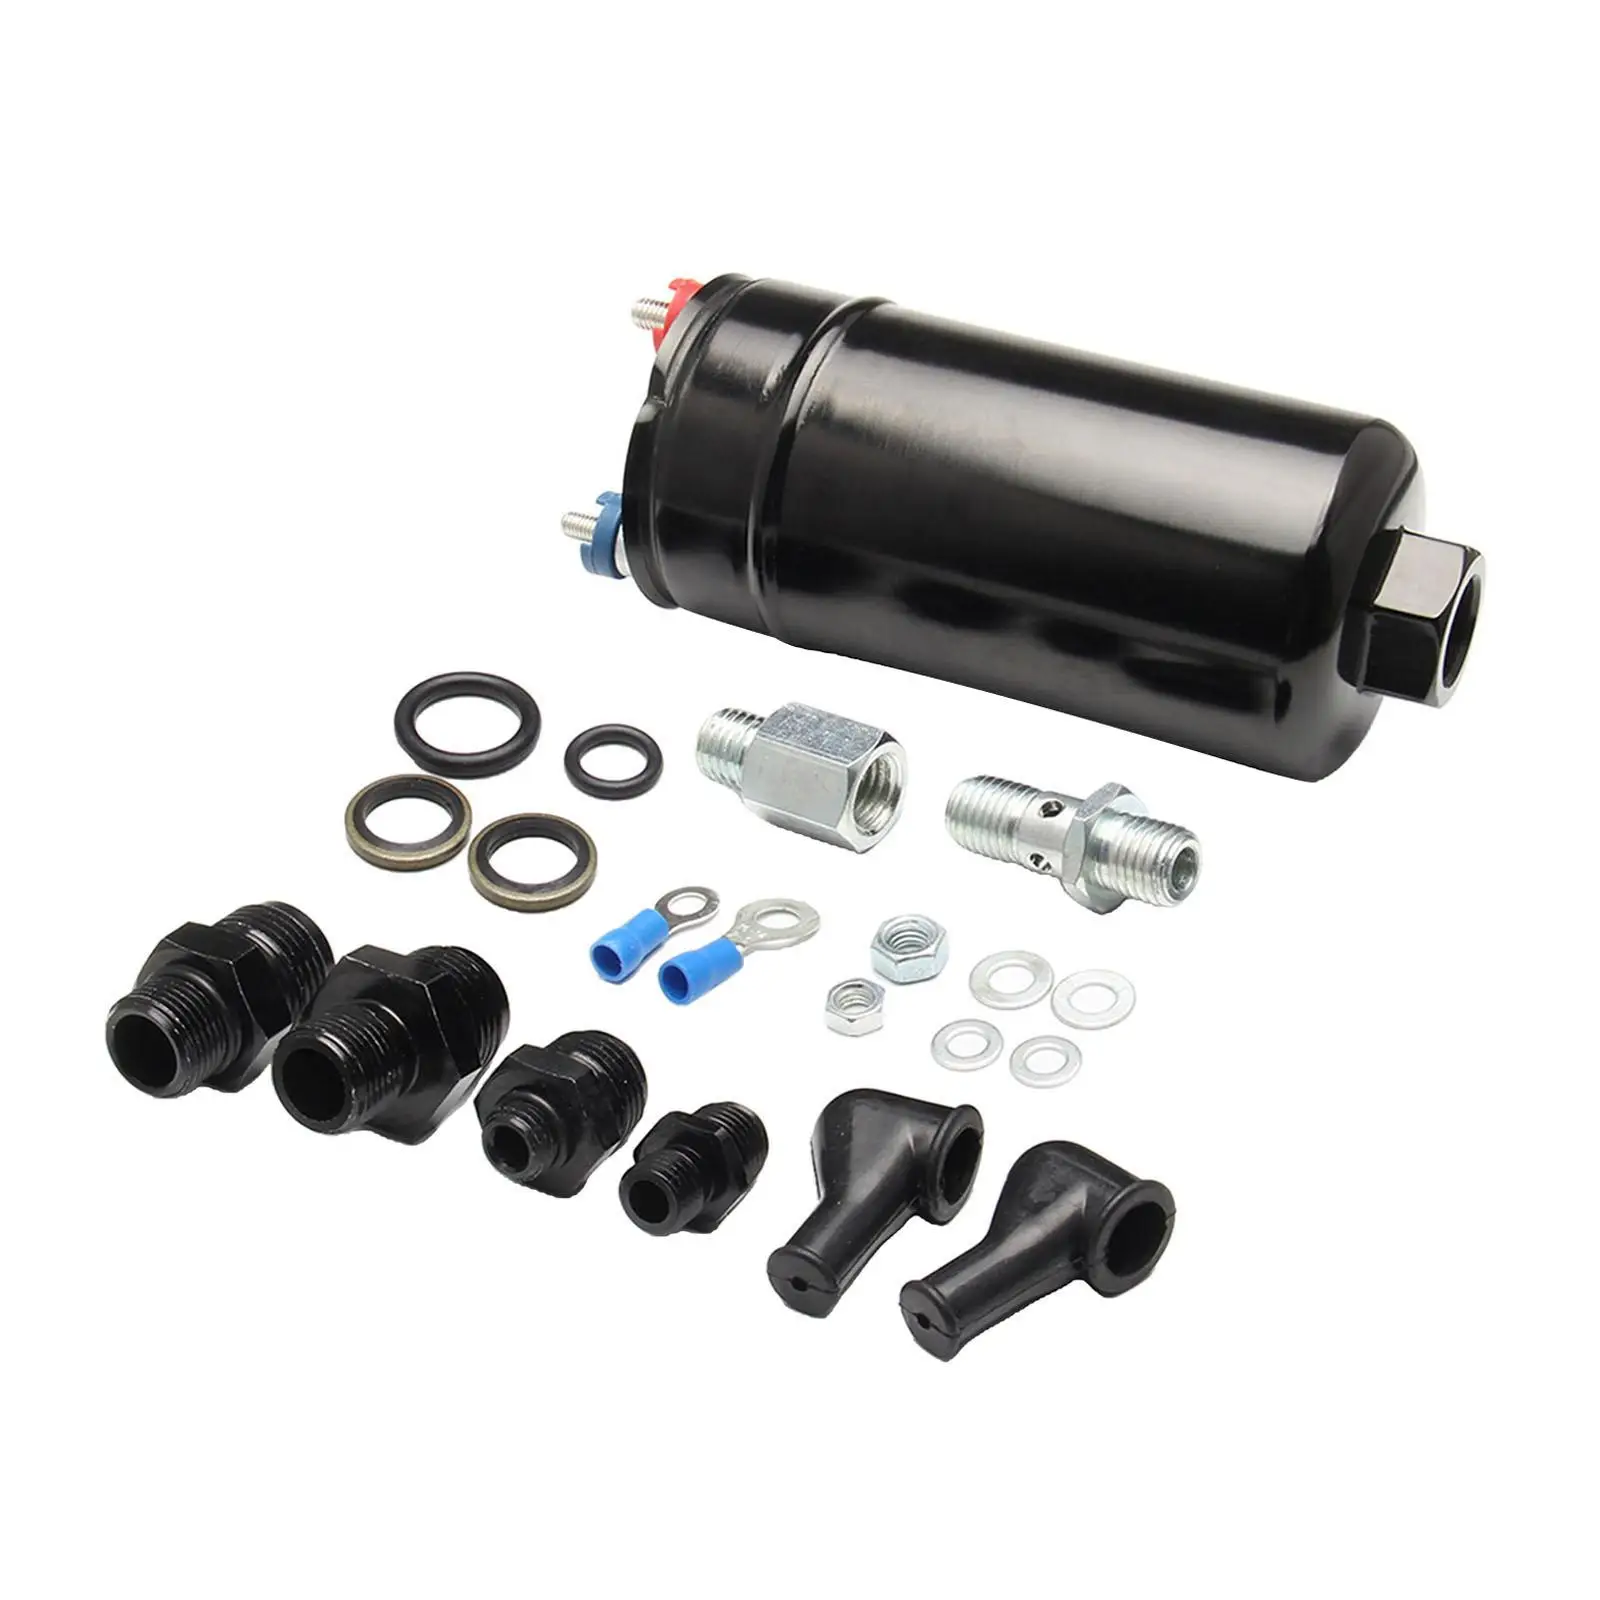 Universal External Fuel Pump 0580254044 Accessories 300Lph 12 for 044  E85 Only for Gasoline Car